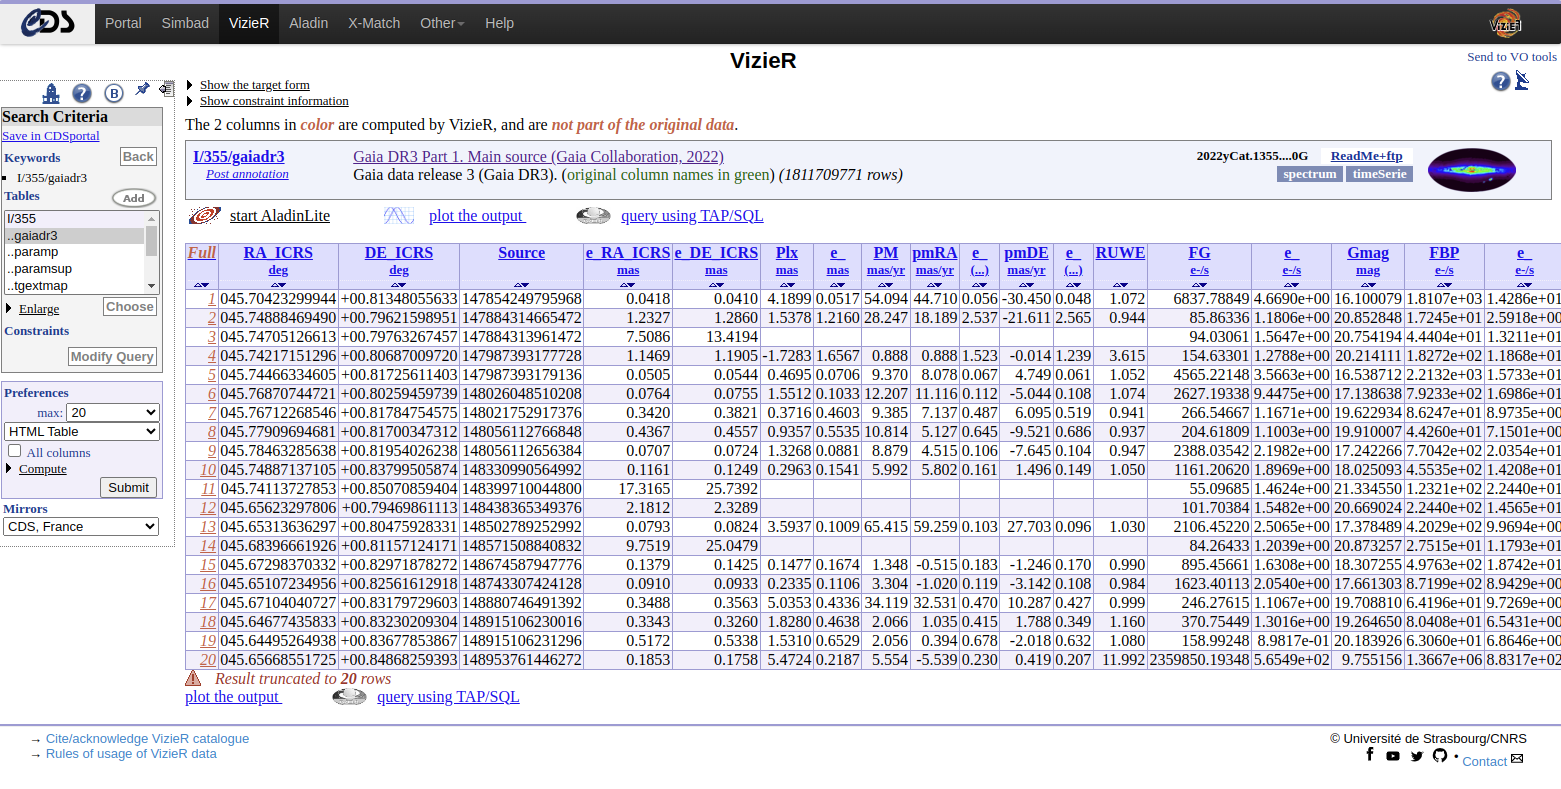 Screenshot: Example of a VizieR table ingested. The figure shows the first 20 rows for the table 'I/355/gaiadr3'.